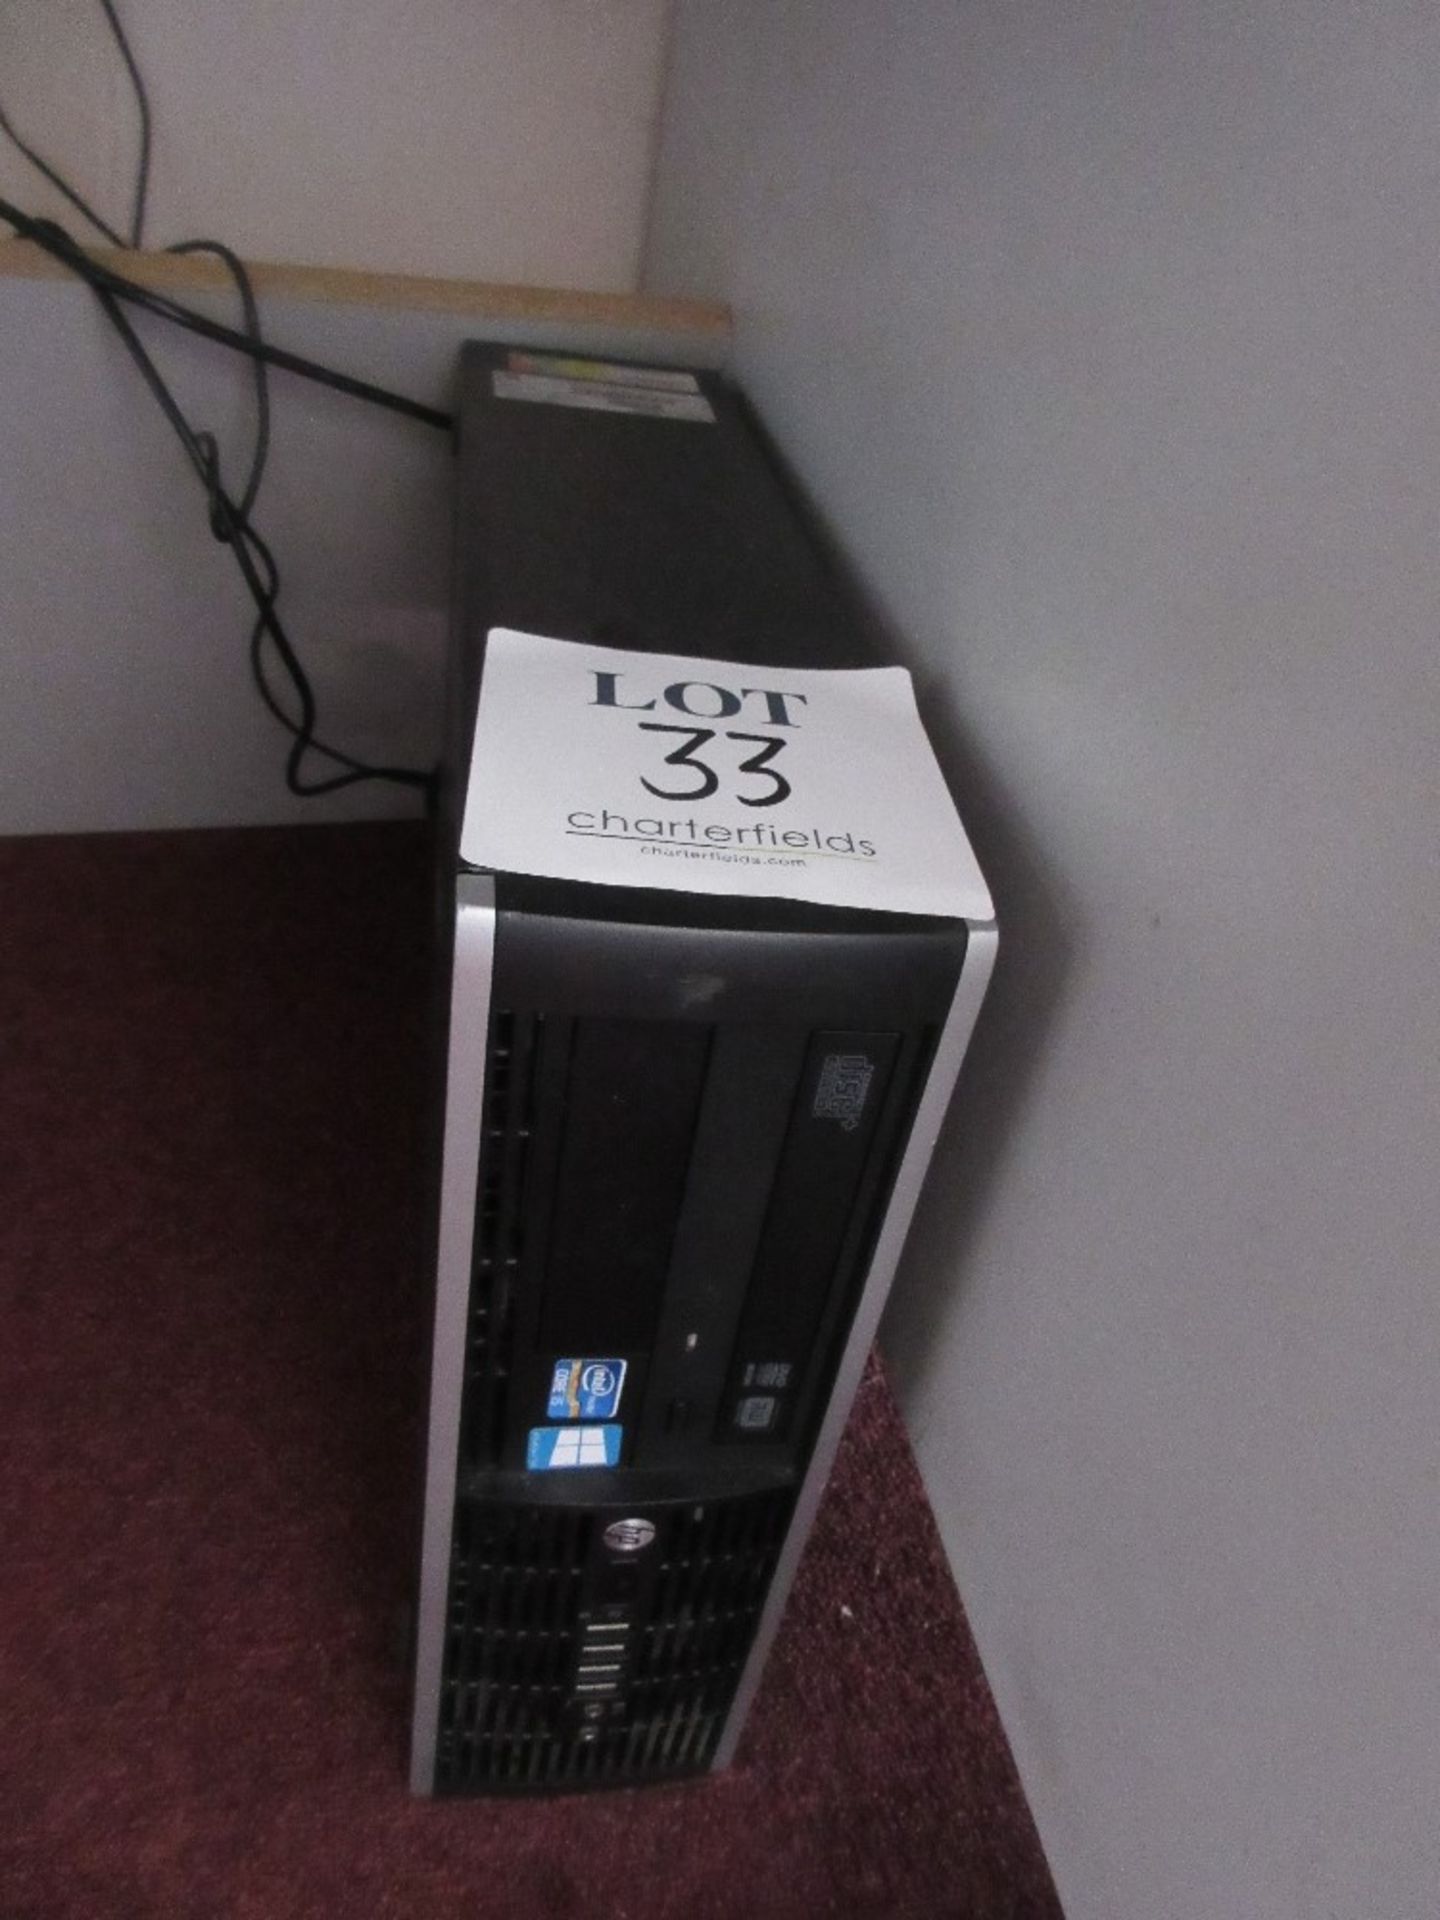 Hewlett Packard mini tower PC with flat screen monitor, keyboard and mouse incorporating I5-2400 Pro